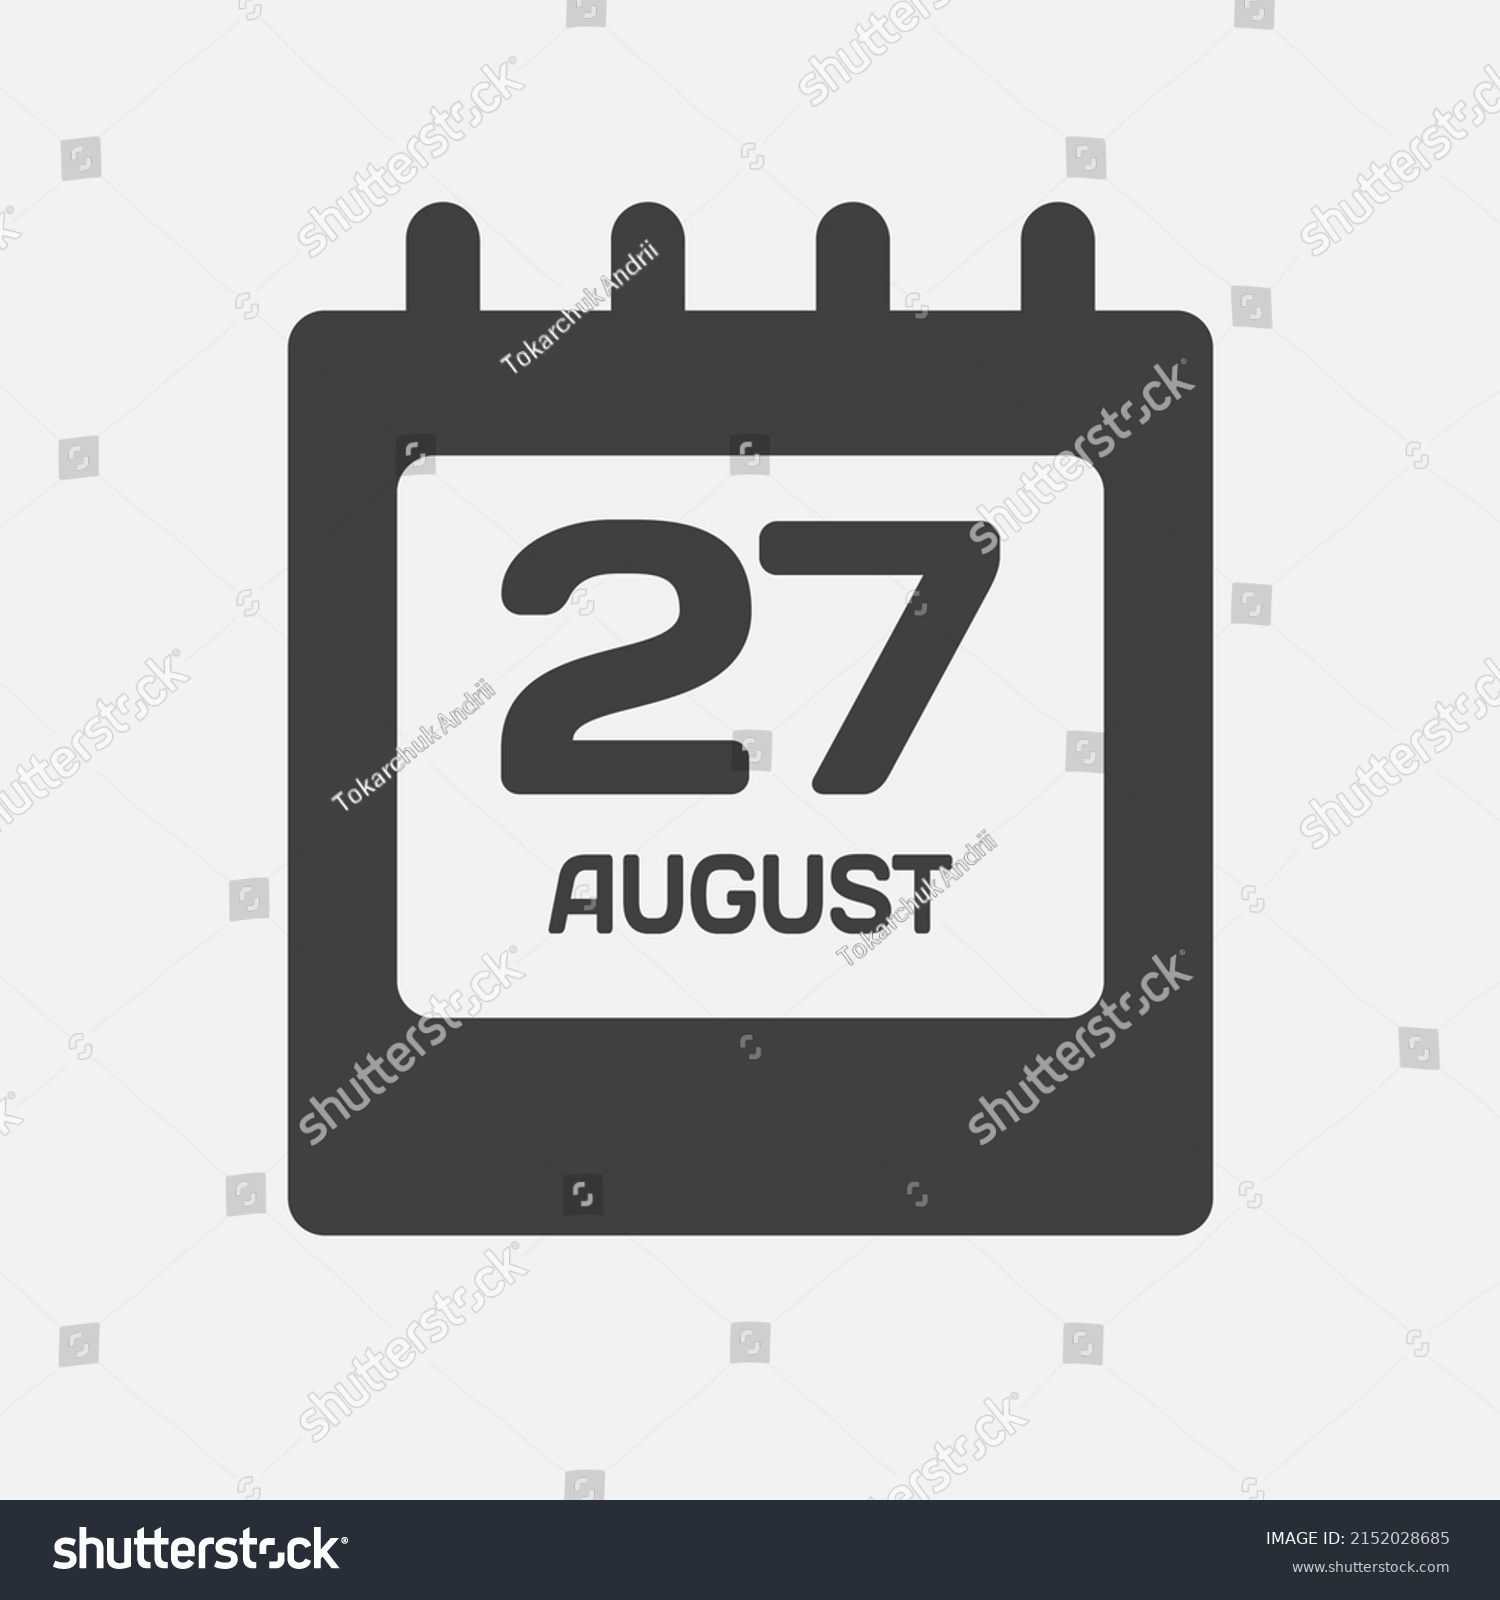 SVG of Icon page calendar day - 27 August. Days of the month, vector illustration flat style. 27th date day of week Sunday, Monday, Tuesday, Wednesday, Thursday, Friday, Saturday. Summer holidays in August svg